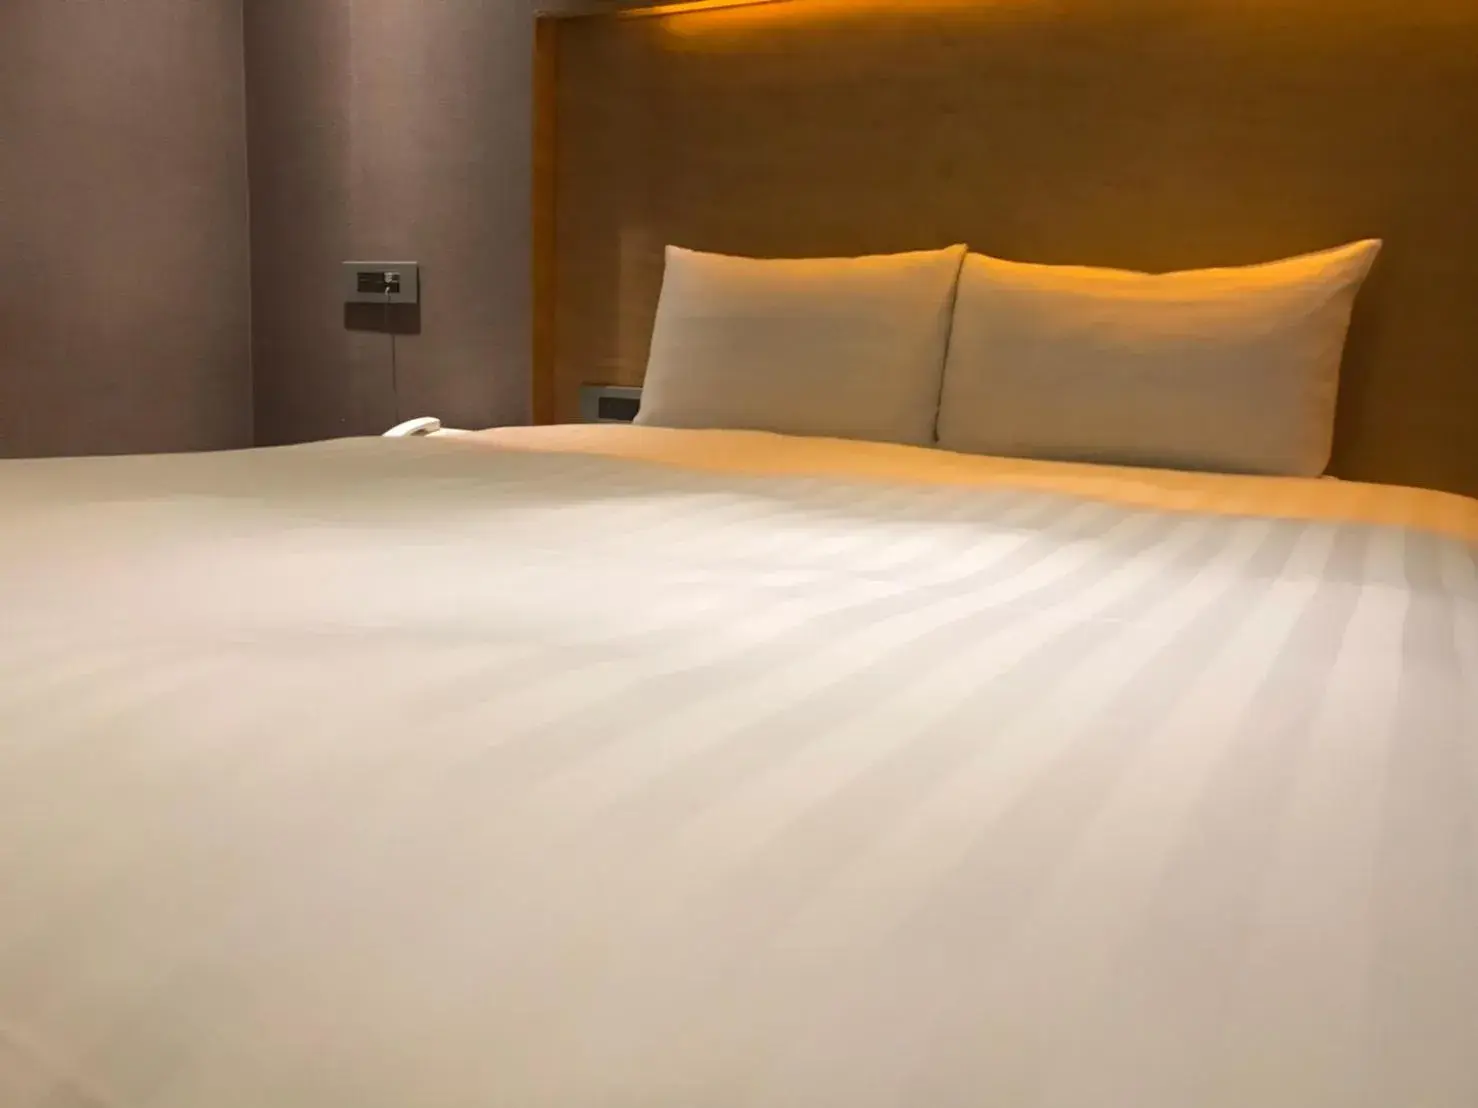 Bed in Lessing Hotel Qixian